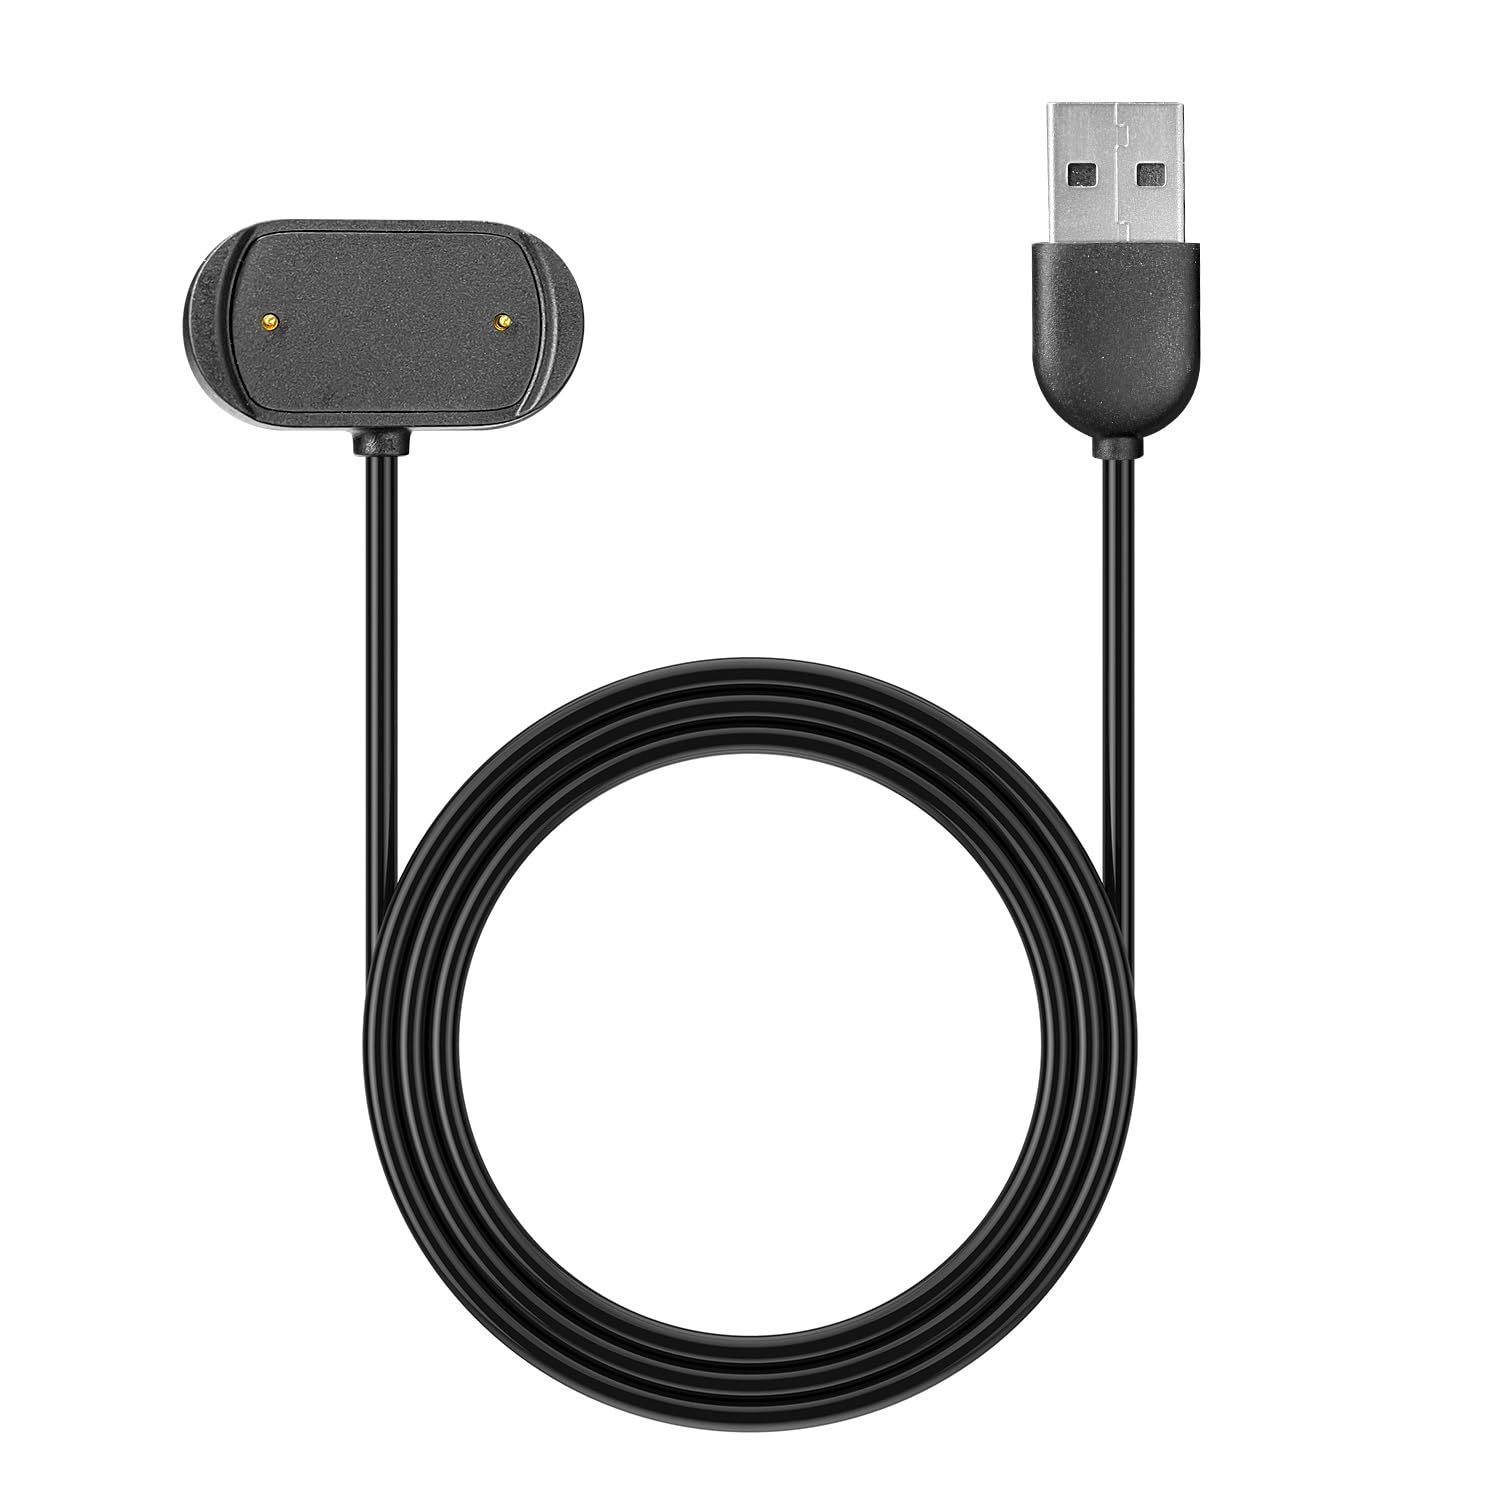 Amazfit Charger Cable GTR 4, GTS 4, Cheetah Series, GTR 3 Pro, GTR 3, GTS 3, T-Rex 2, Replacement Magnetic Charging Cable, Official Product